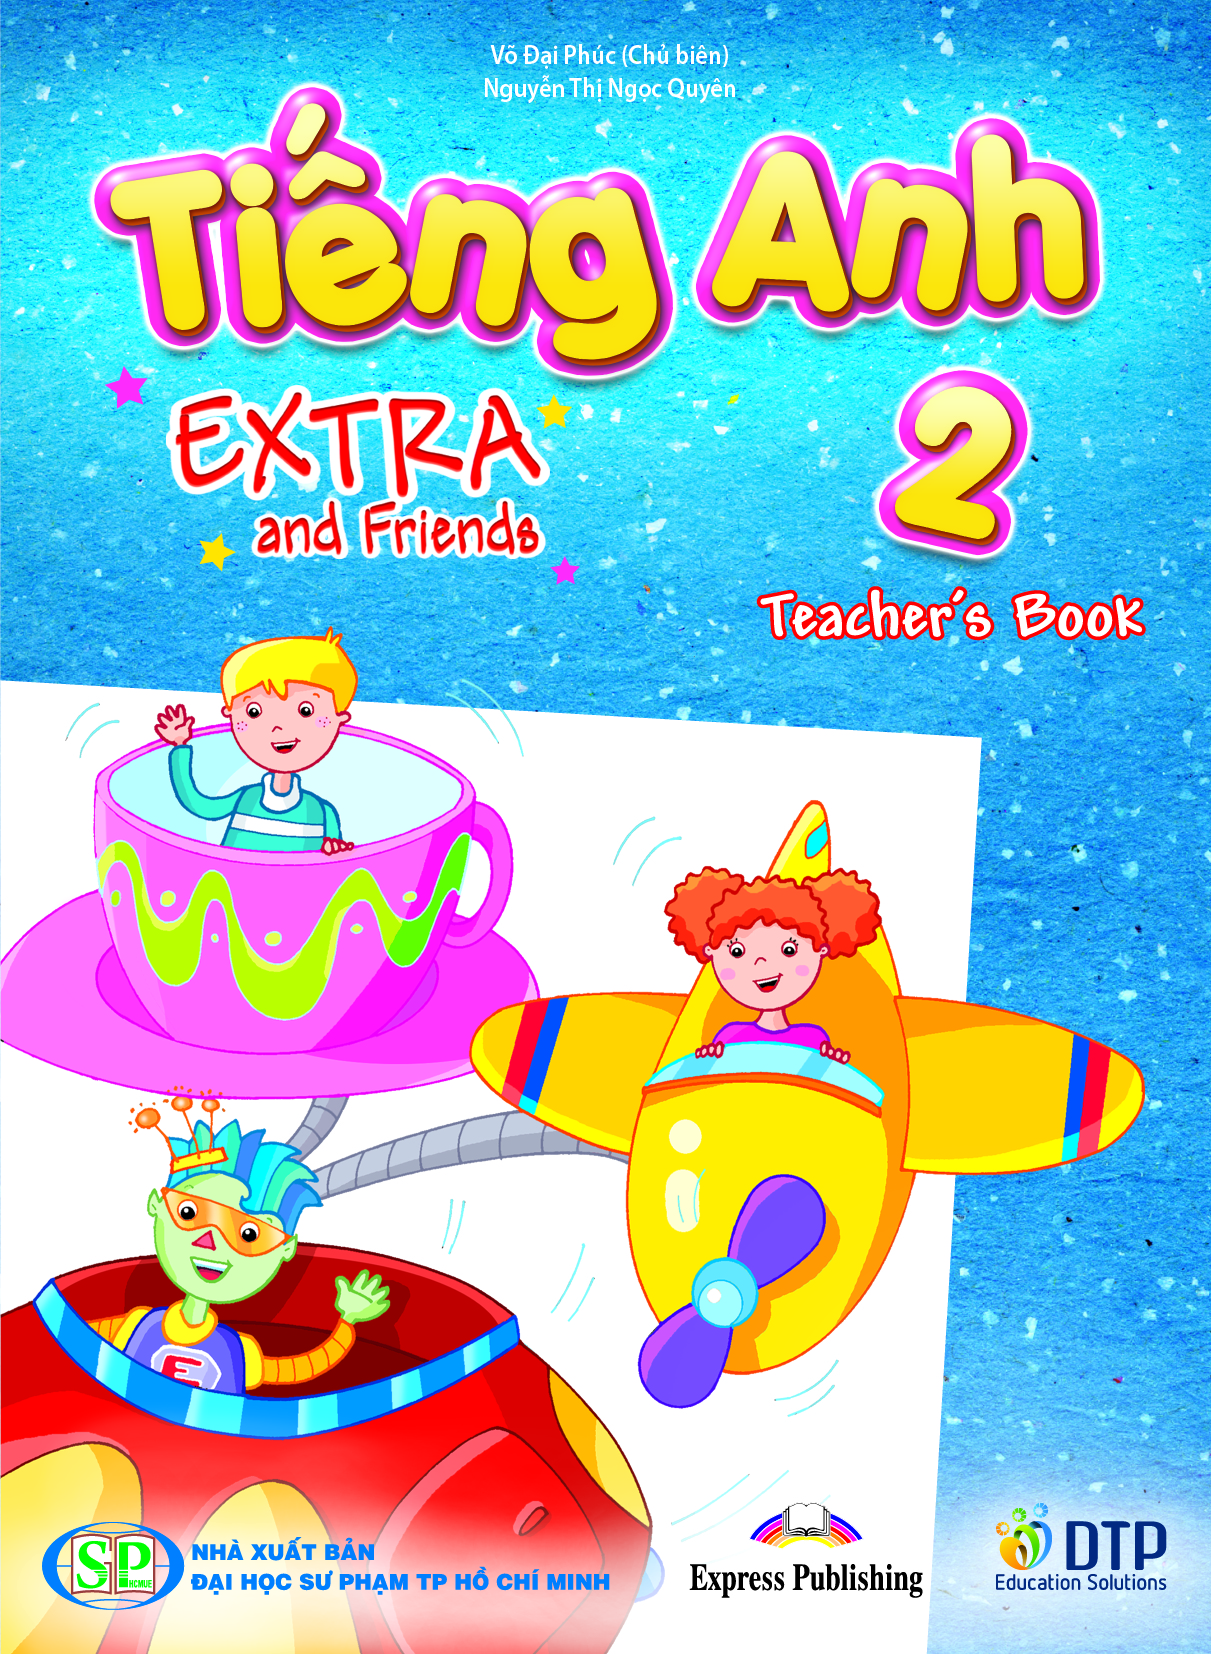 Tiếng Anh 2 Extra and Friends Teacher's book